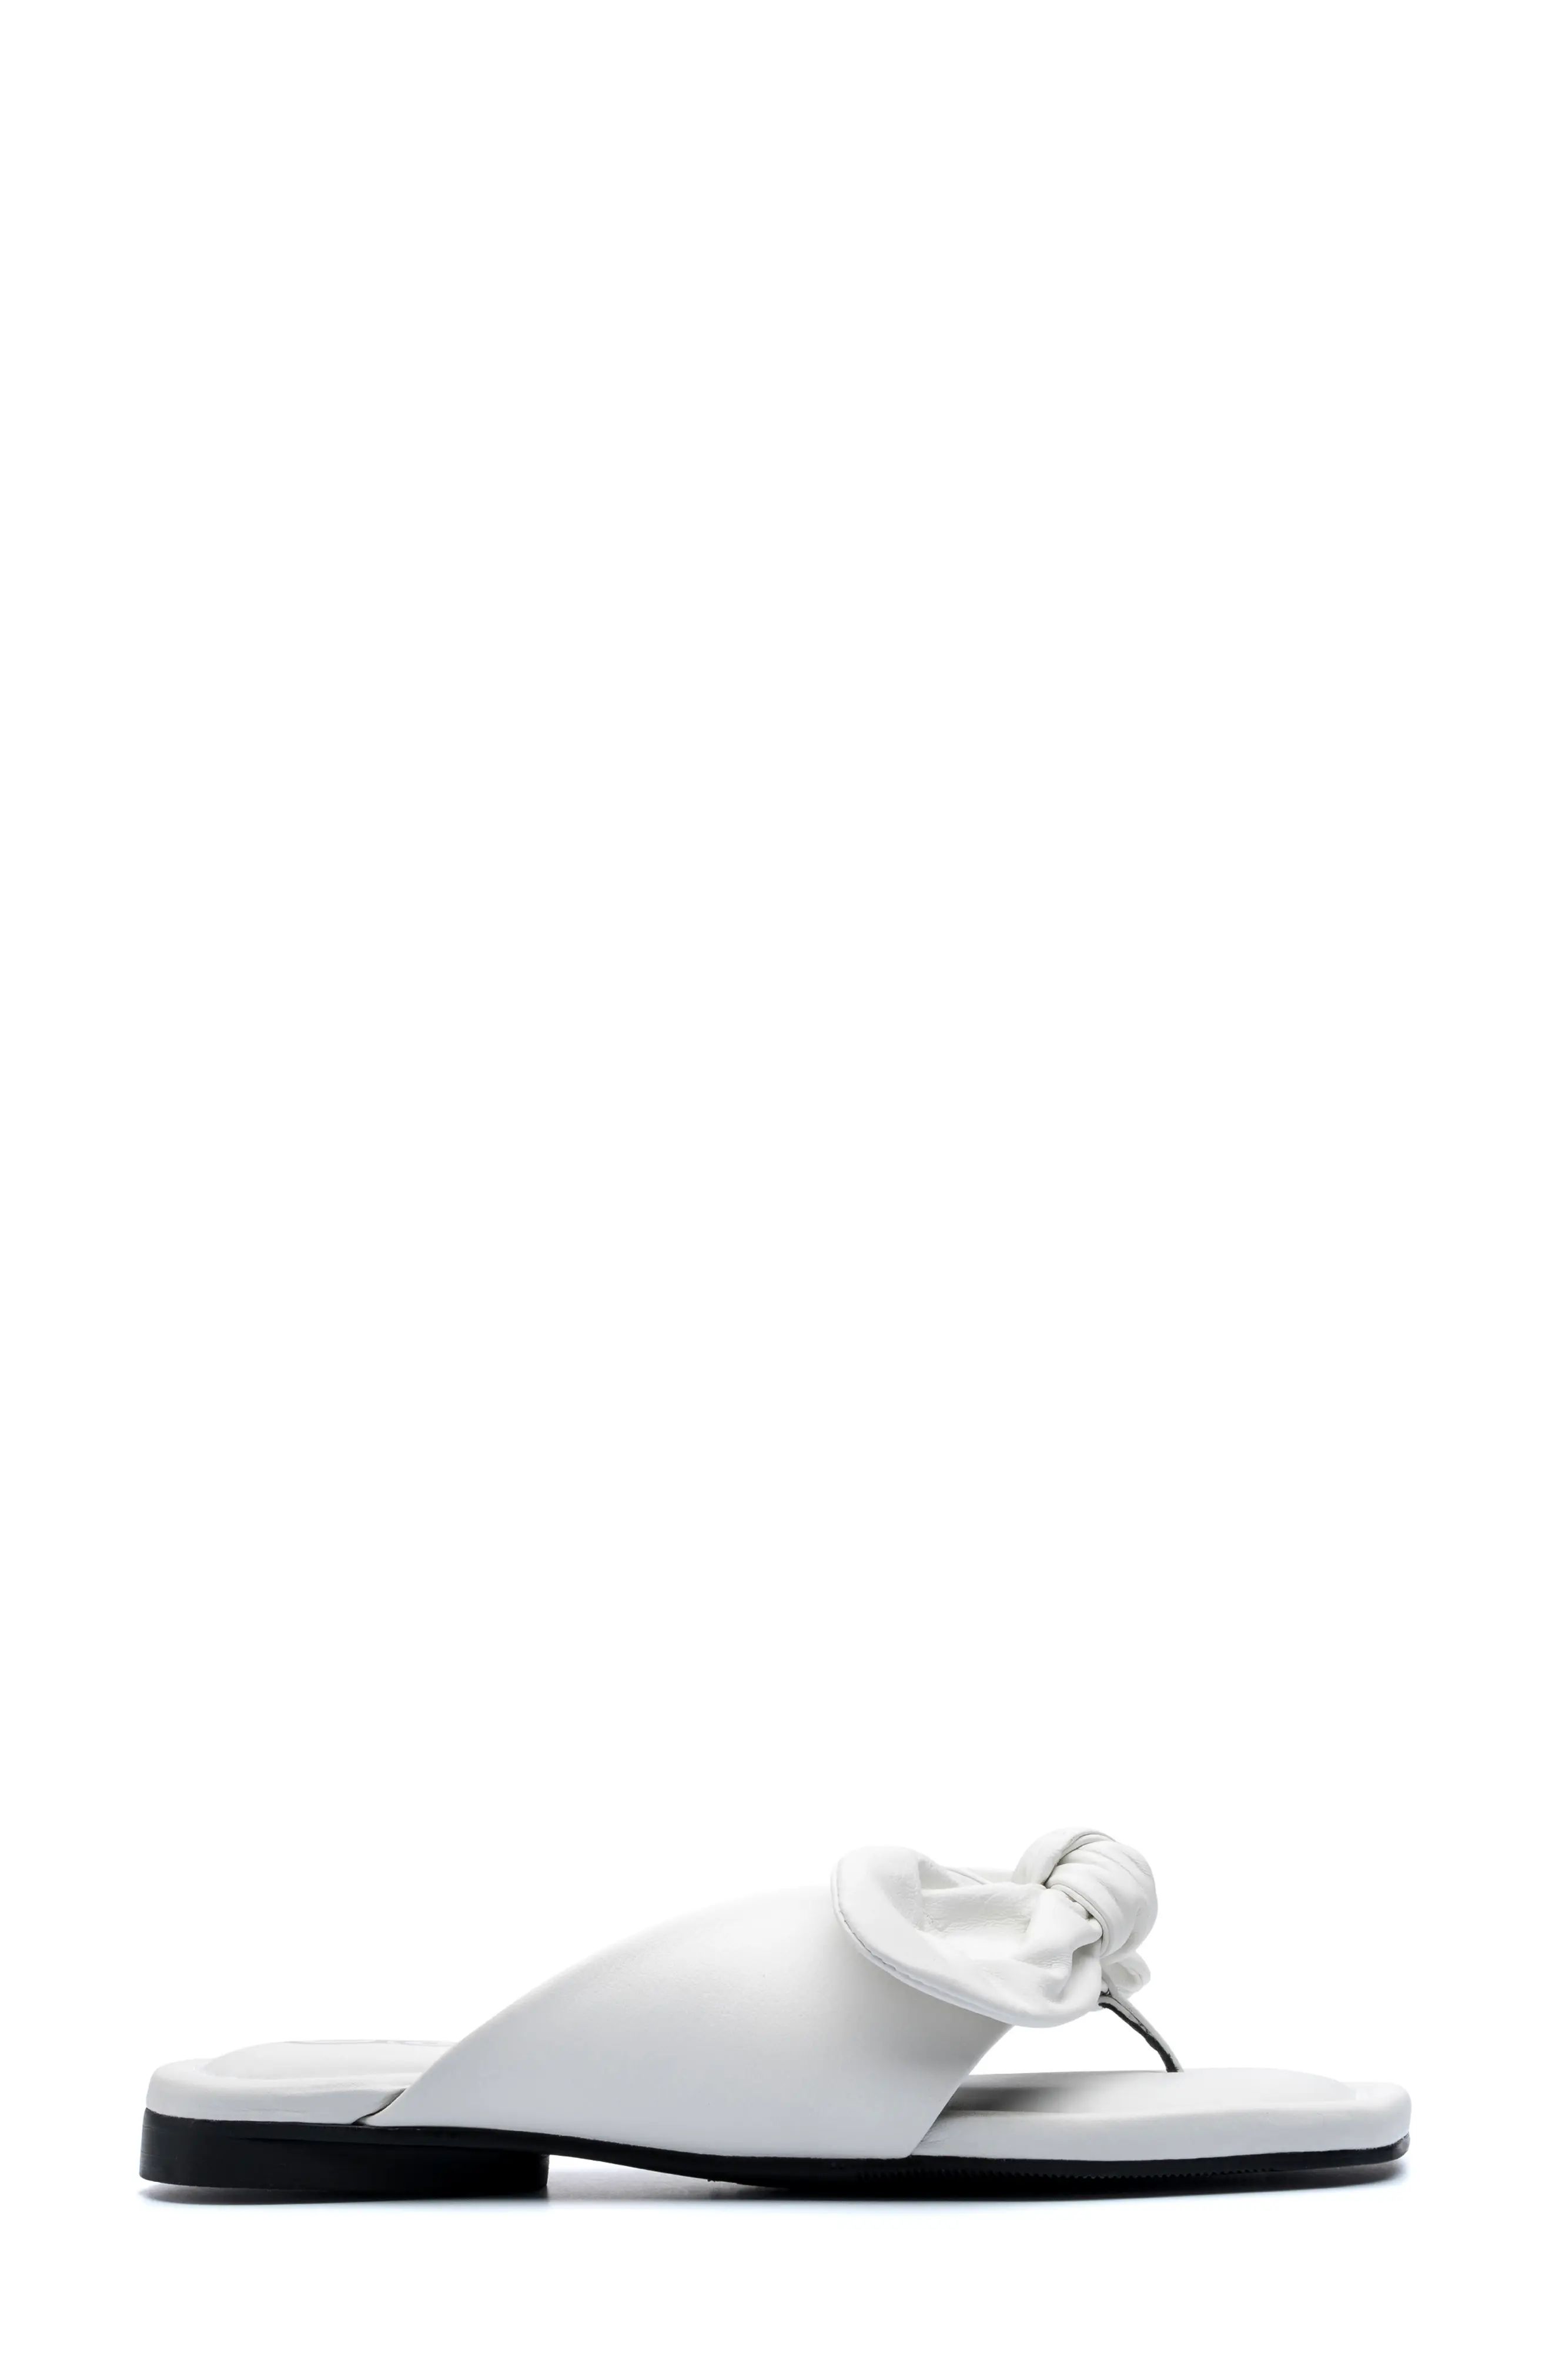 Golo Bowthong Flip Flop in White at Nordstrom, Size 10 | Nordstrom